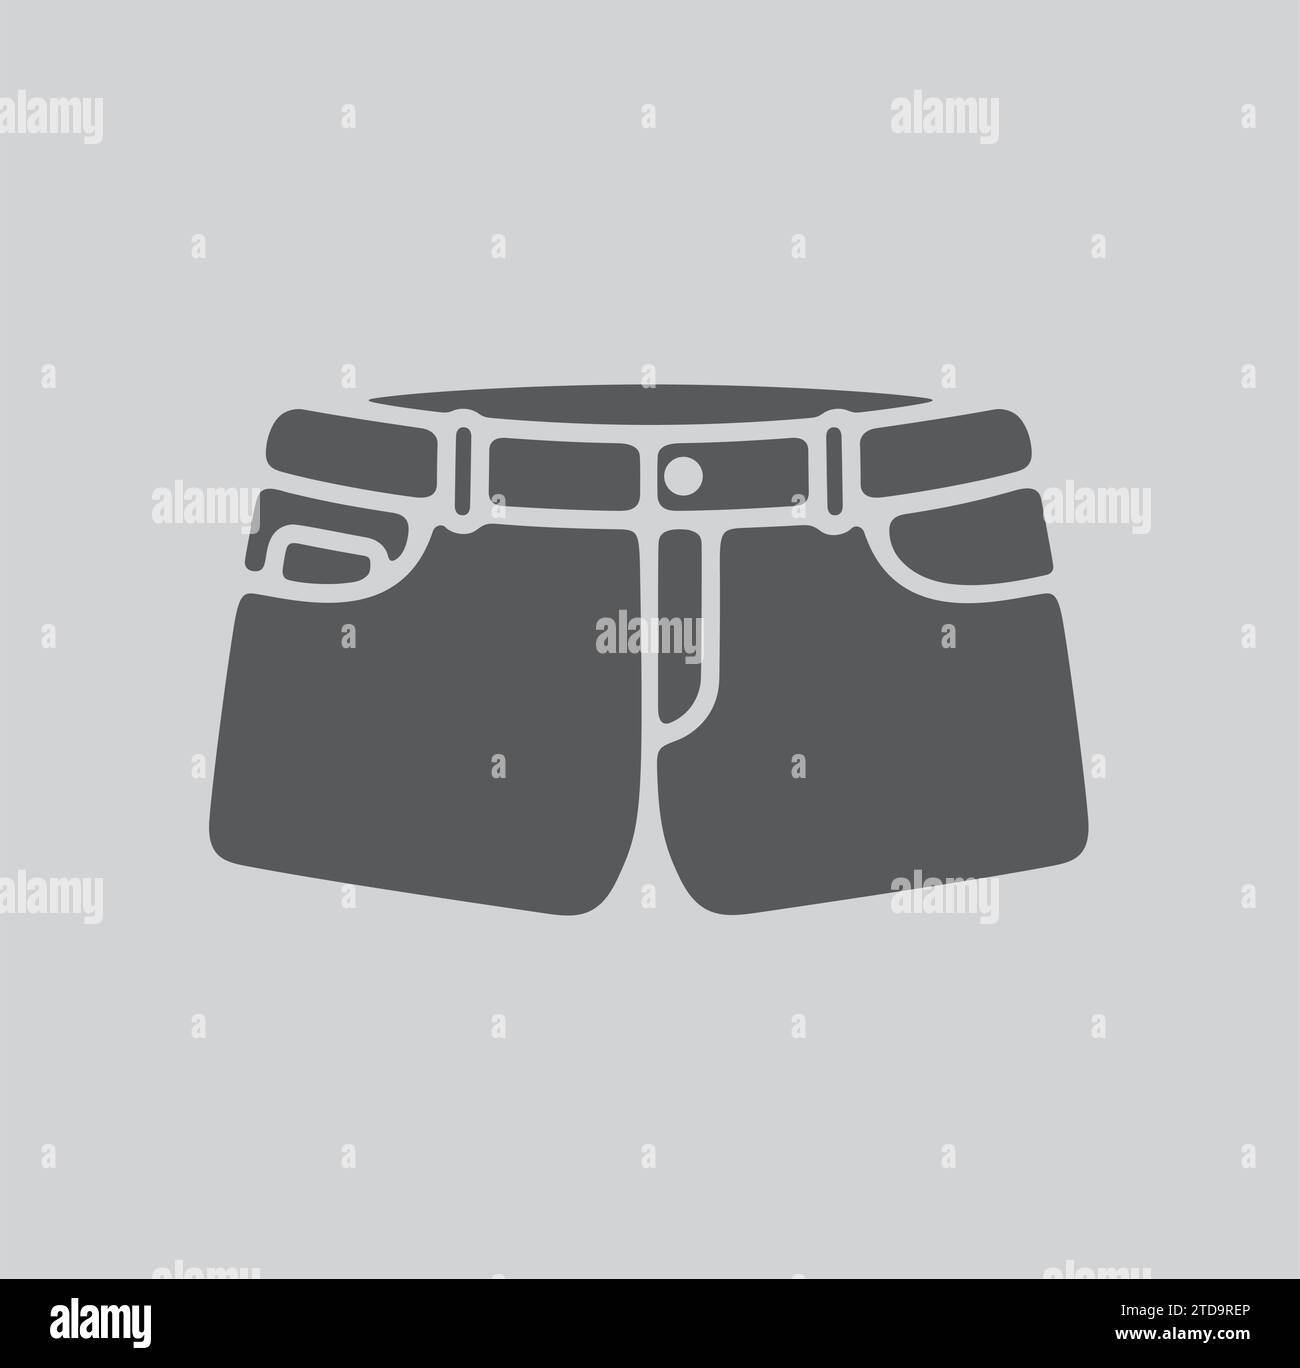 Denim shorts icon on a background. Vector illustration. Stock Vector